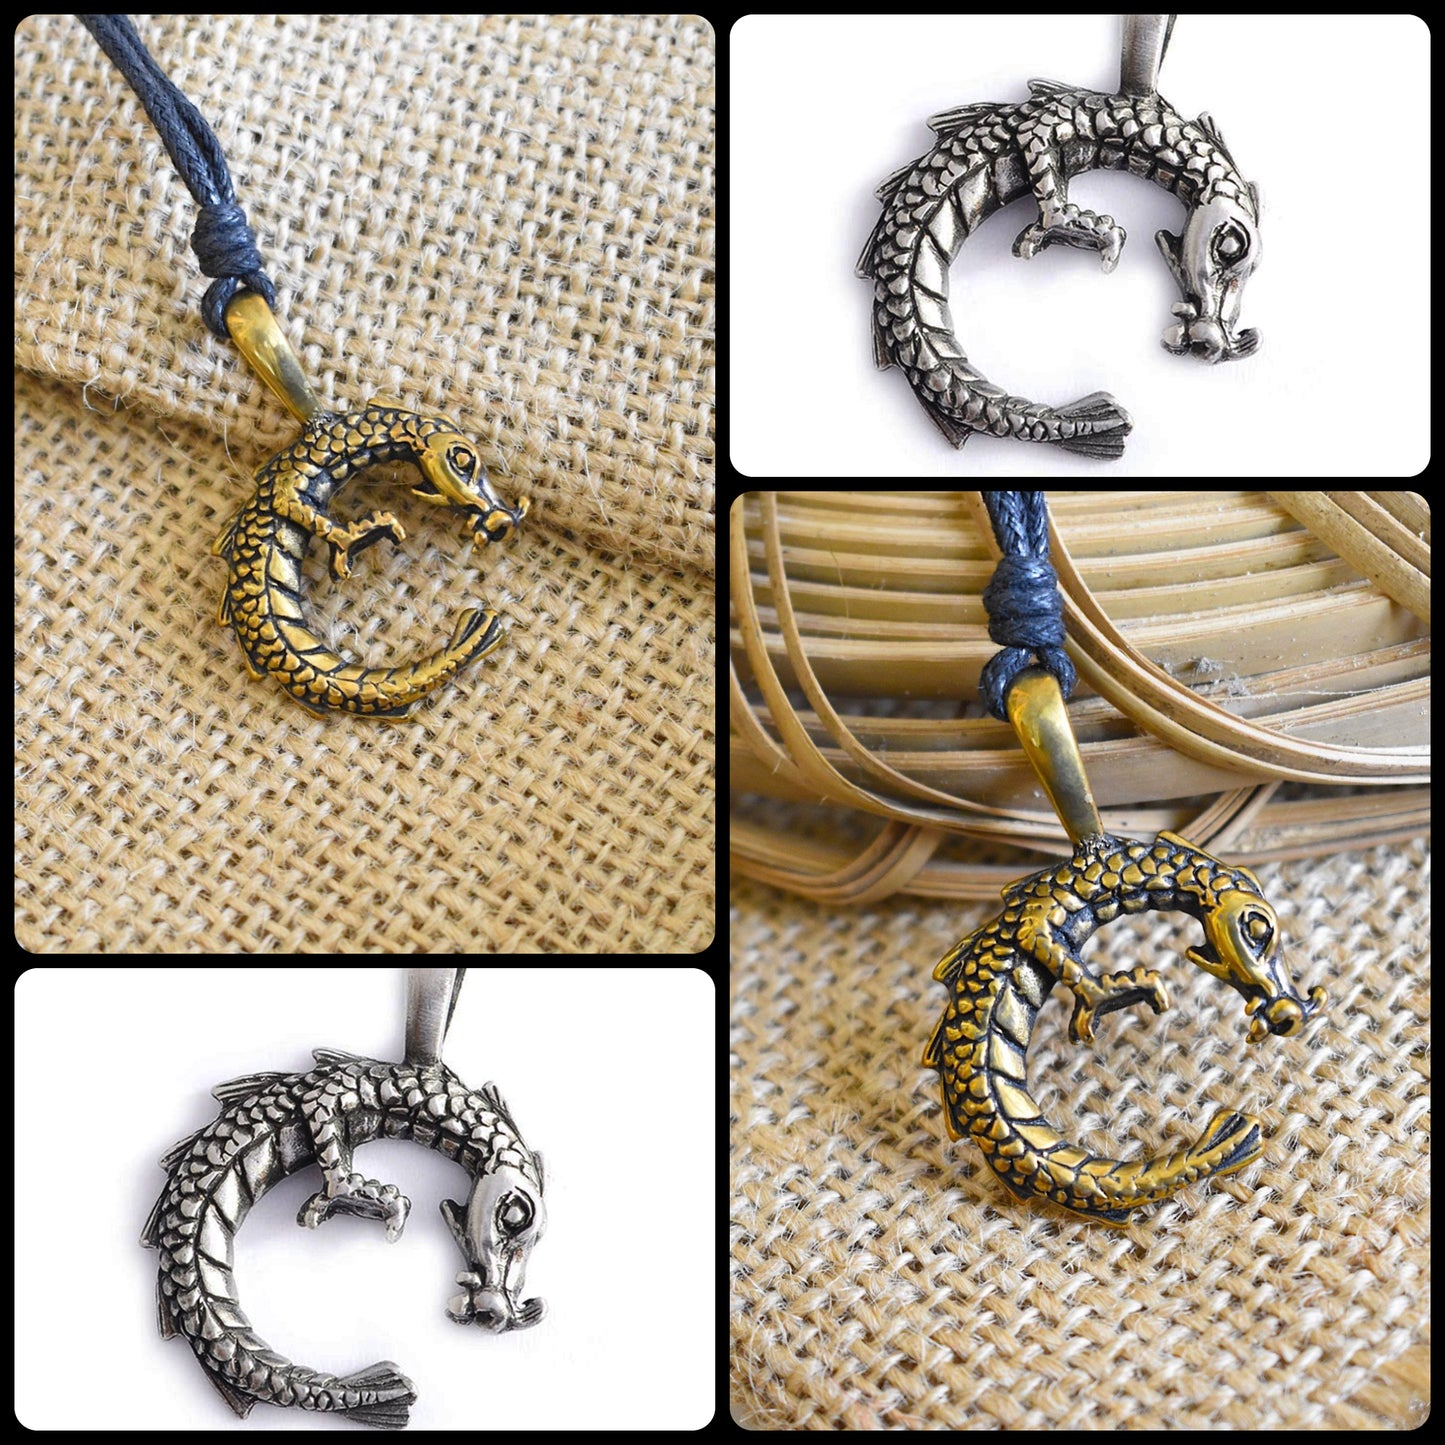 Chinese Dragon Silver Pewter Gold Brass Charm Necklace Pendant Jewelry